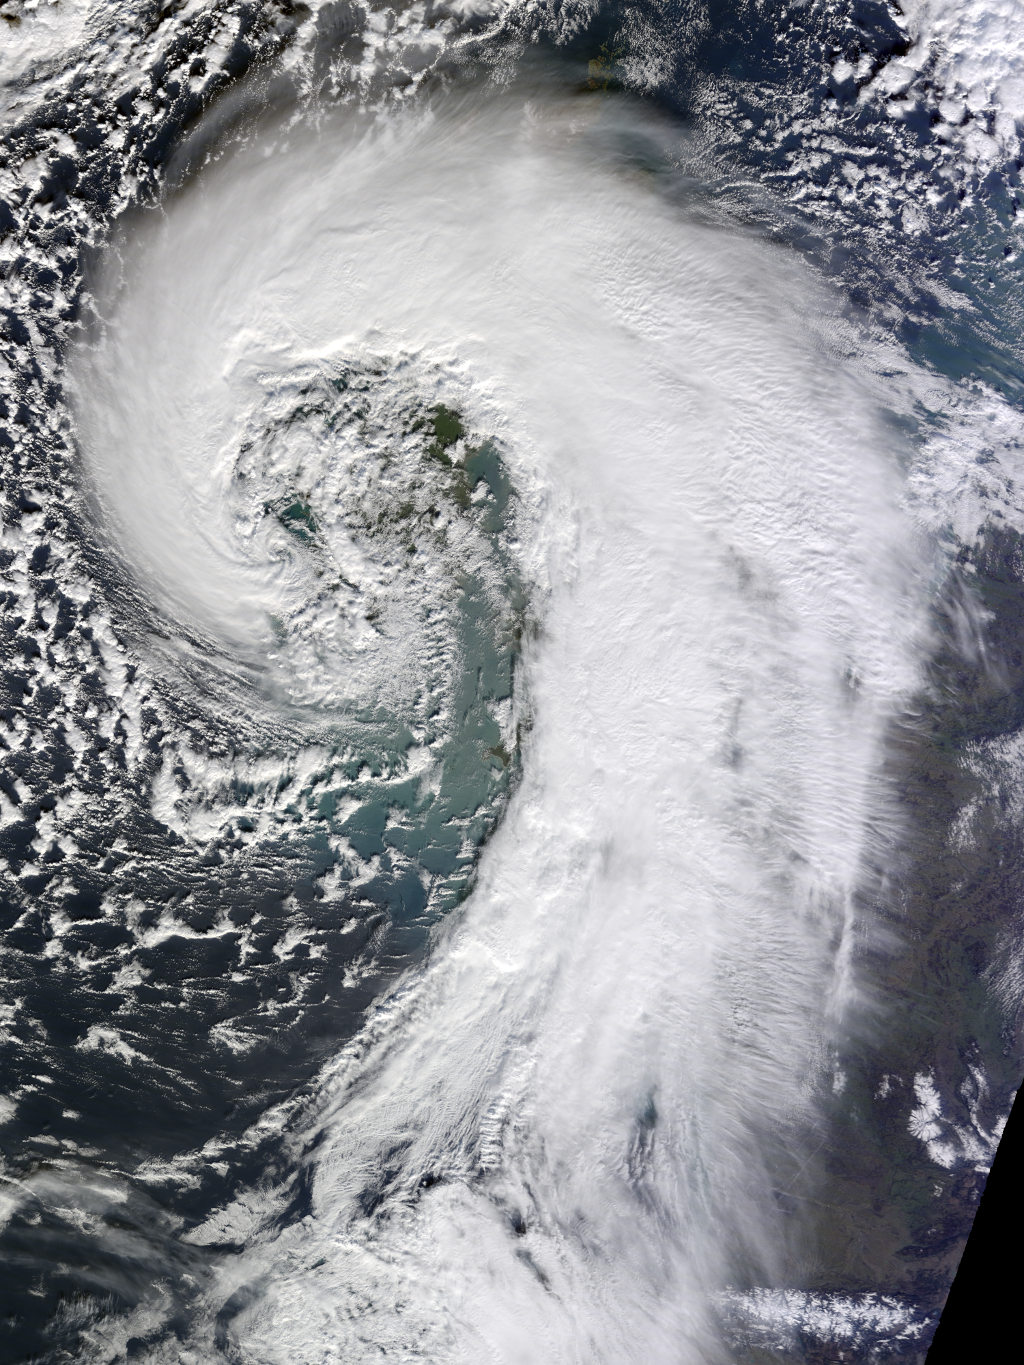 1. Extratropical Cyclone Over United Kingdom of Great Britain and Northern Ireland, February 12, 2014, As Seen By the MODIS Instrument Aboard NASA's Terra Satellite. Photo Credit: National Aeronautics and Space Administration (NASA, http://www.nasa.gov), Government of the United States of America.